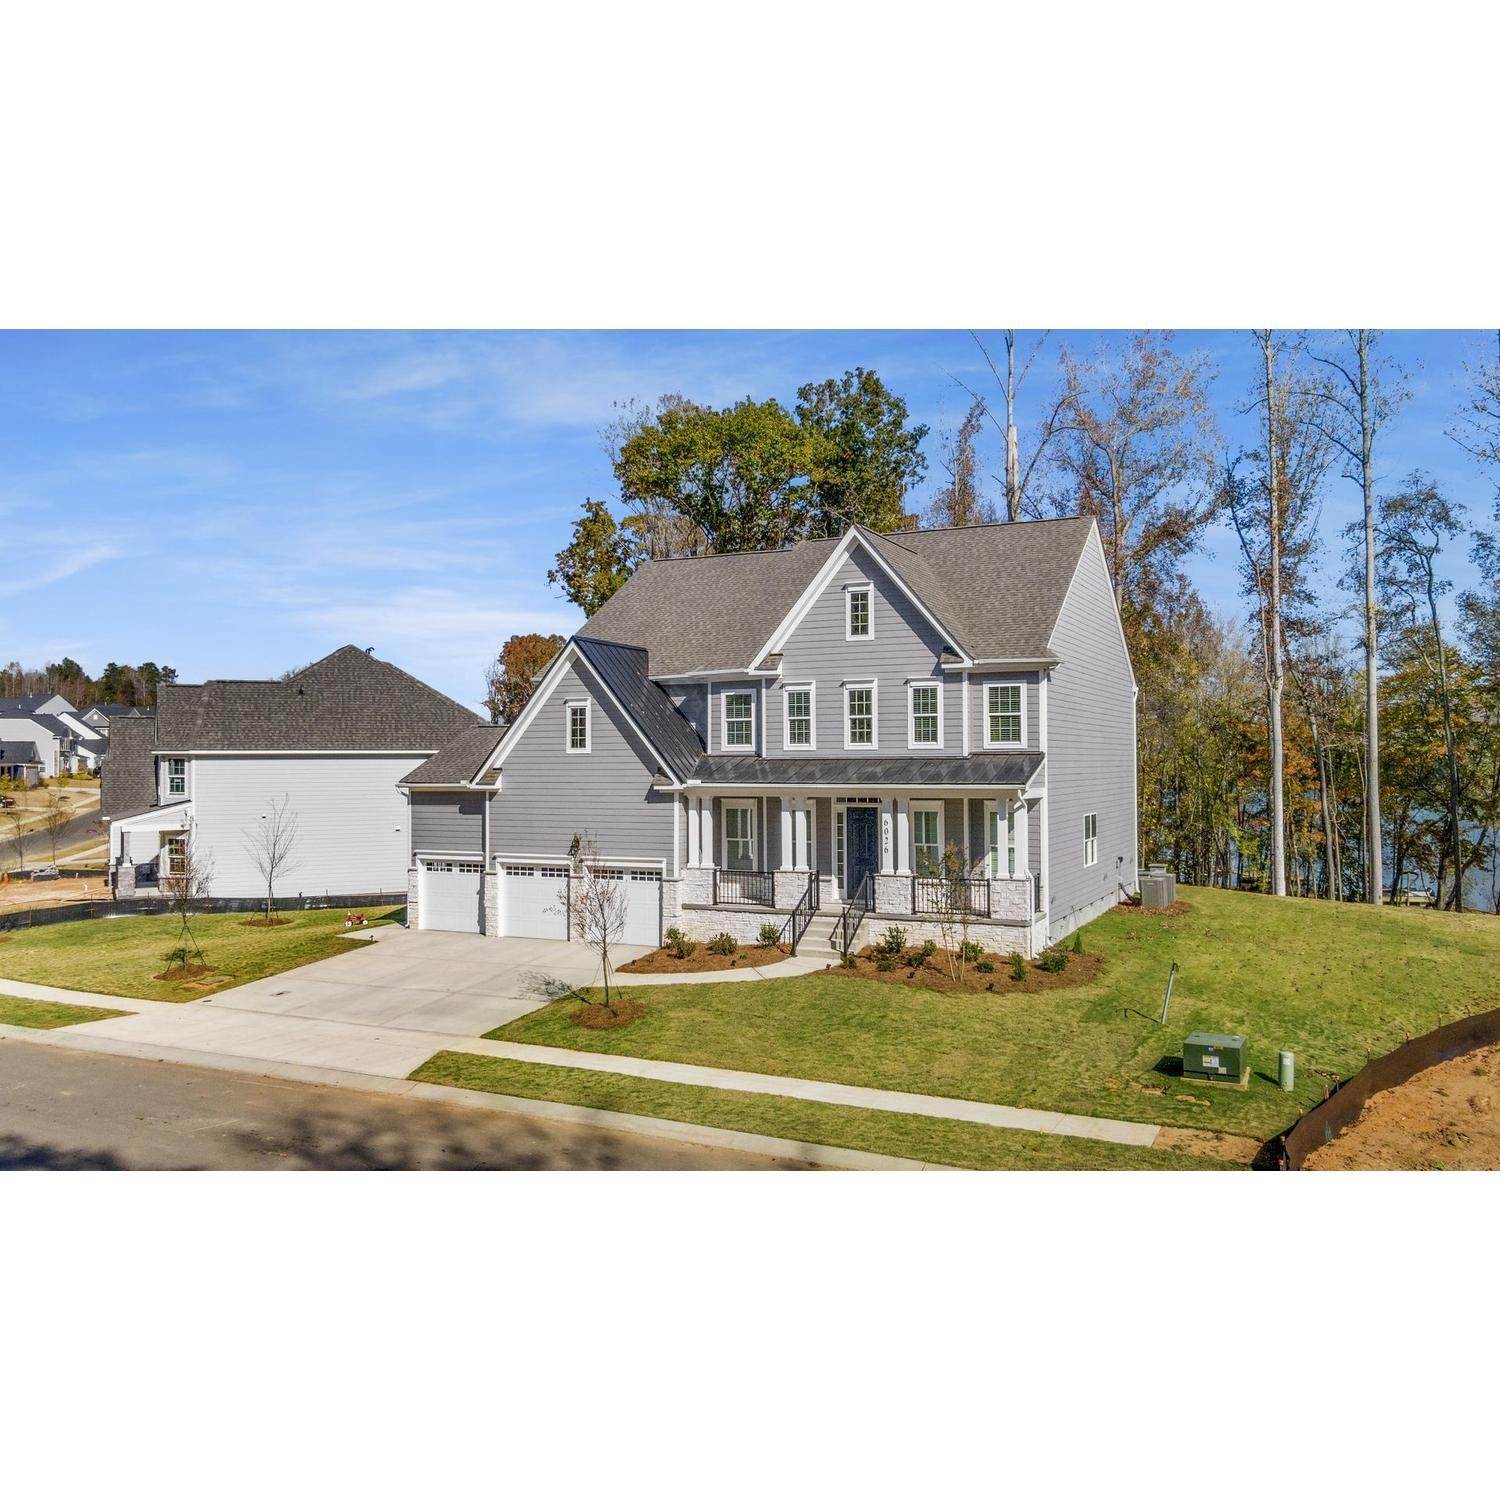 13. 6200 Jepson Ct, Charlotte, NC 28214에 Waterfront at The Vineyards on Lake Wylie 건물